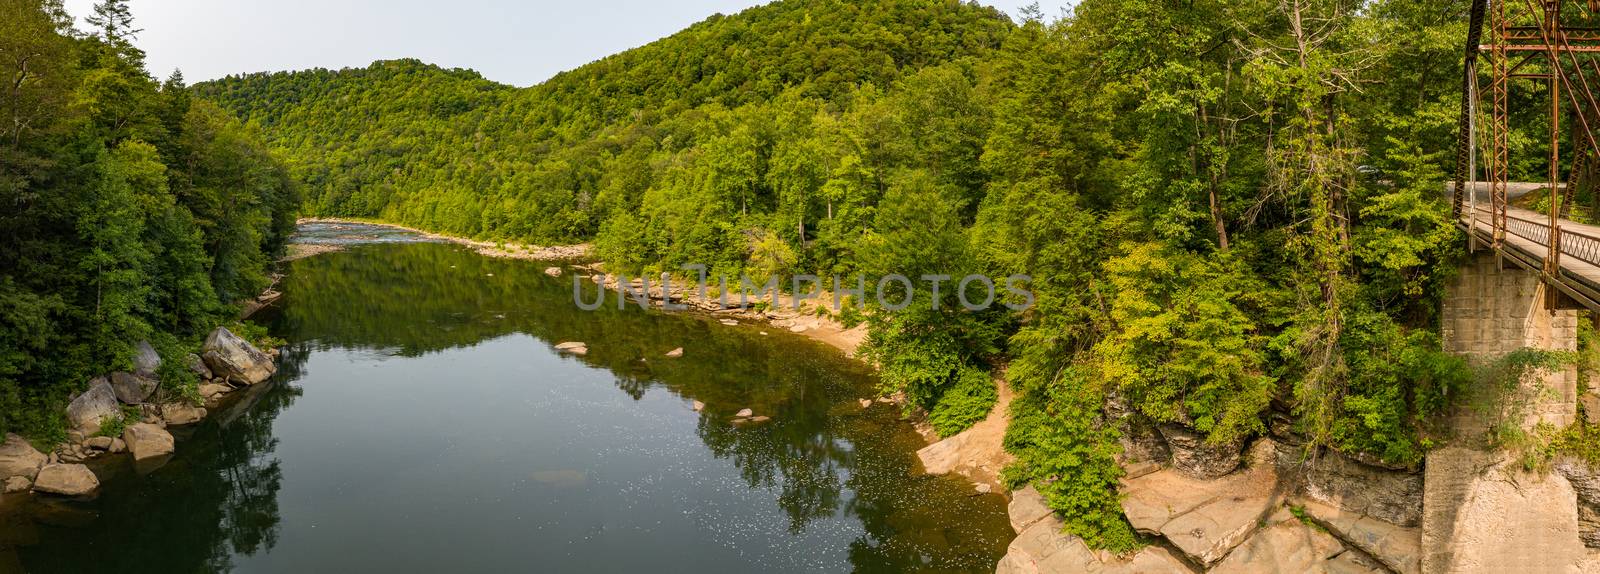 Aerial view of the Cheat River near the 1912 metal truss Jenkinsburg Bridge near Mt Nebo and Morgantown over Cheat River